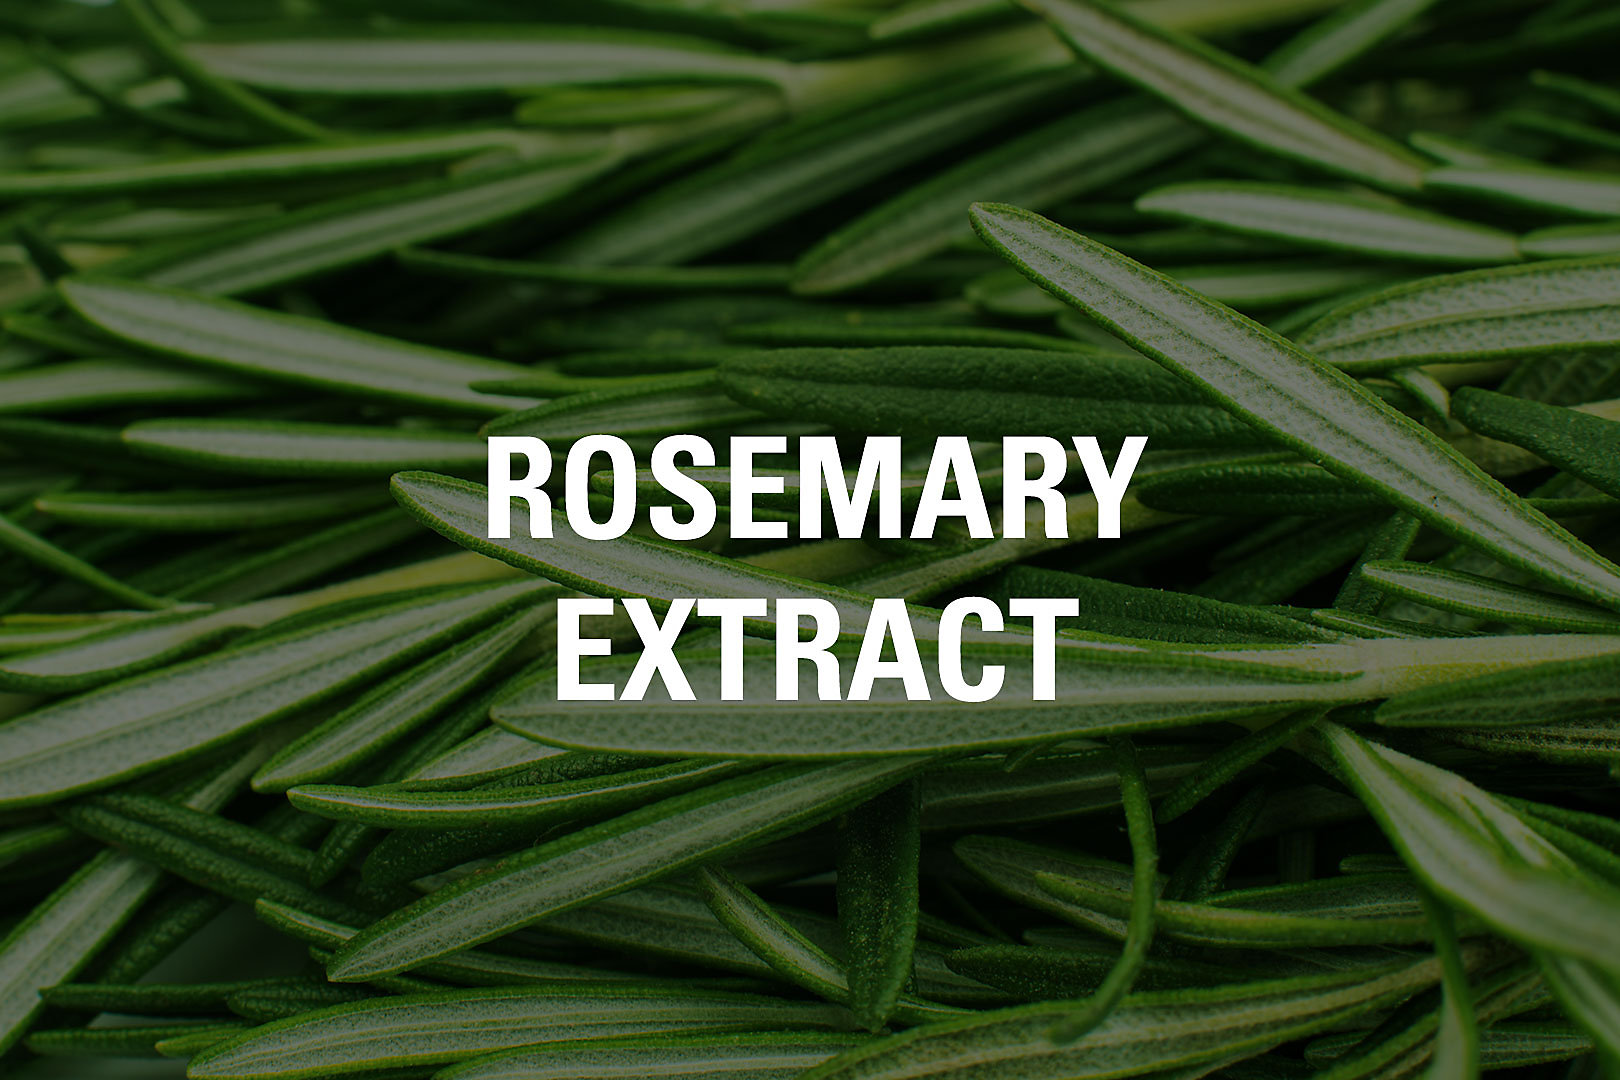 Rosemary Extract Ingredient Tile